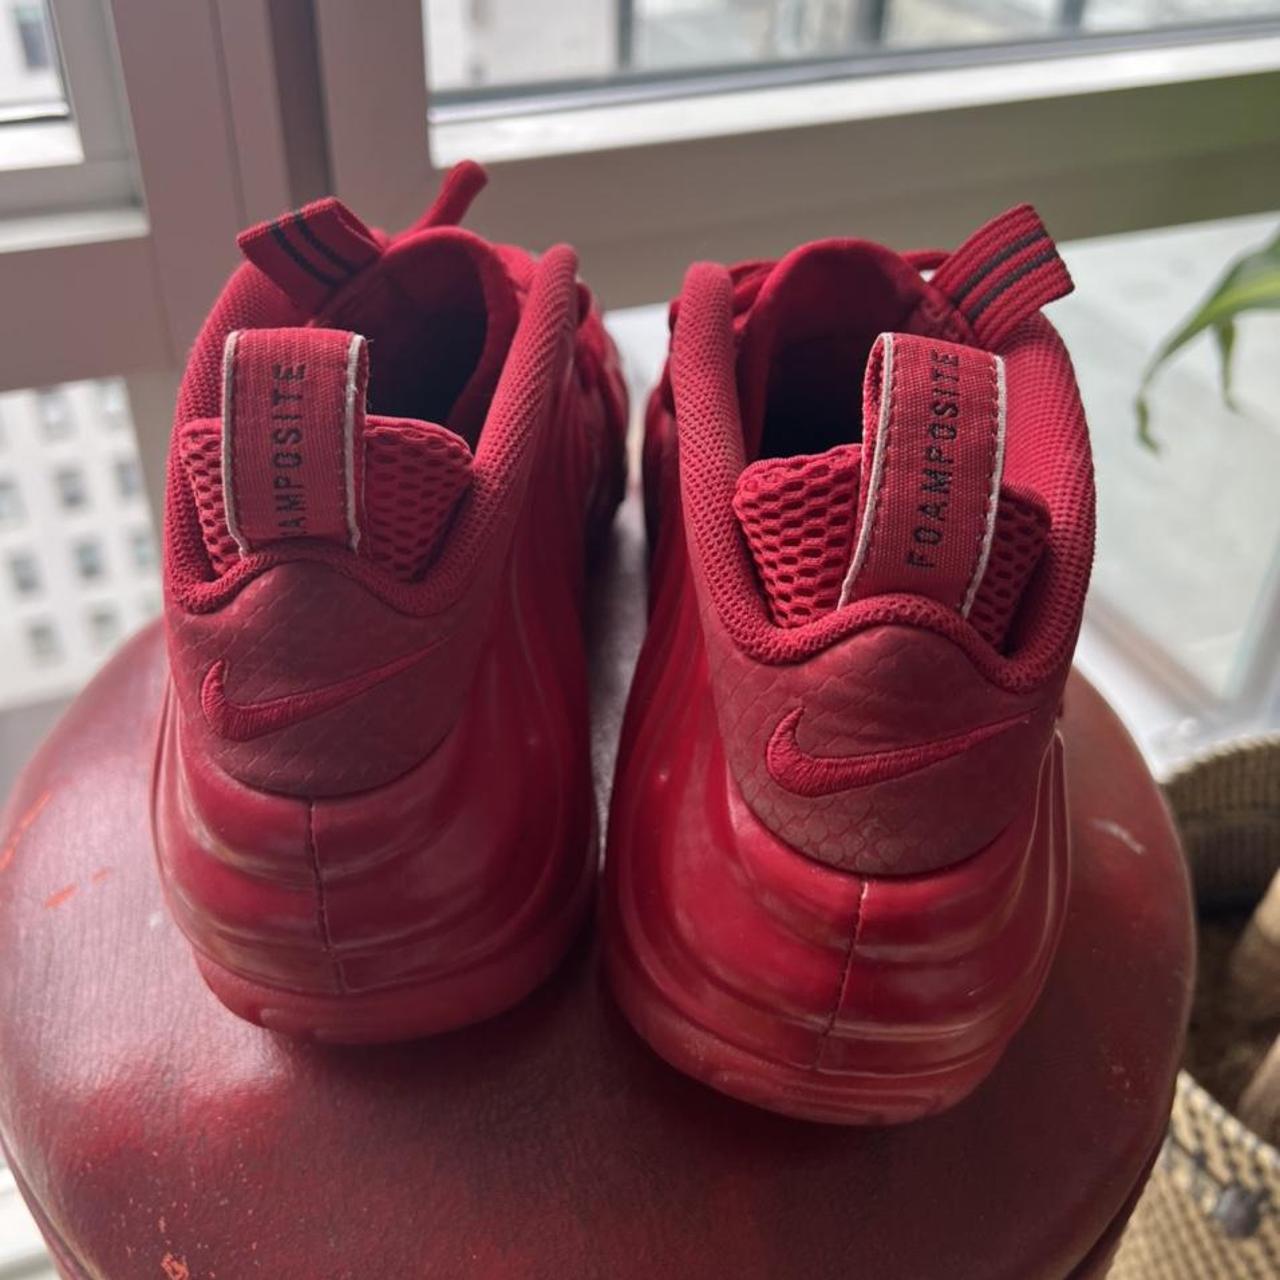 Product Image 3 - RED OCTOBER NIKE AIR FOAMPOSITES